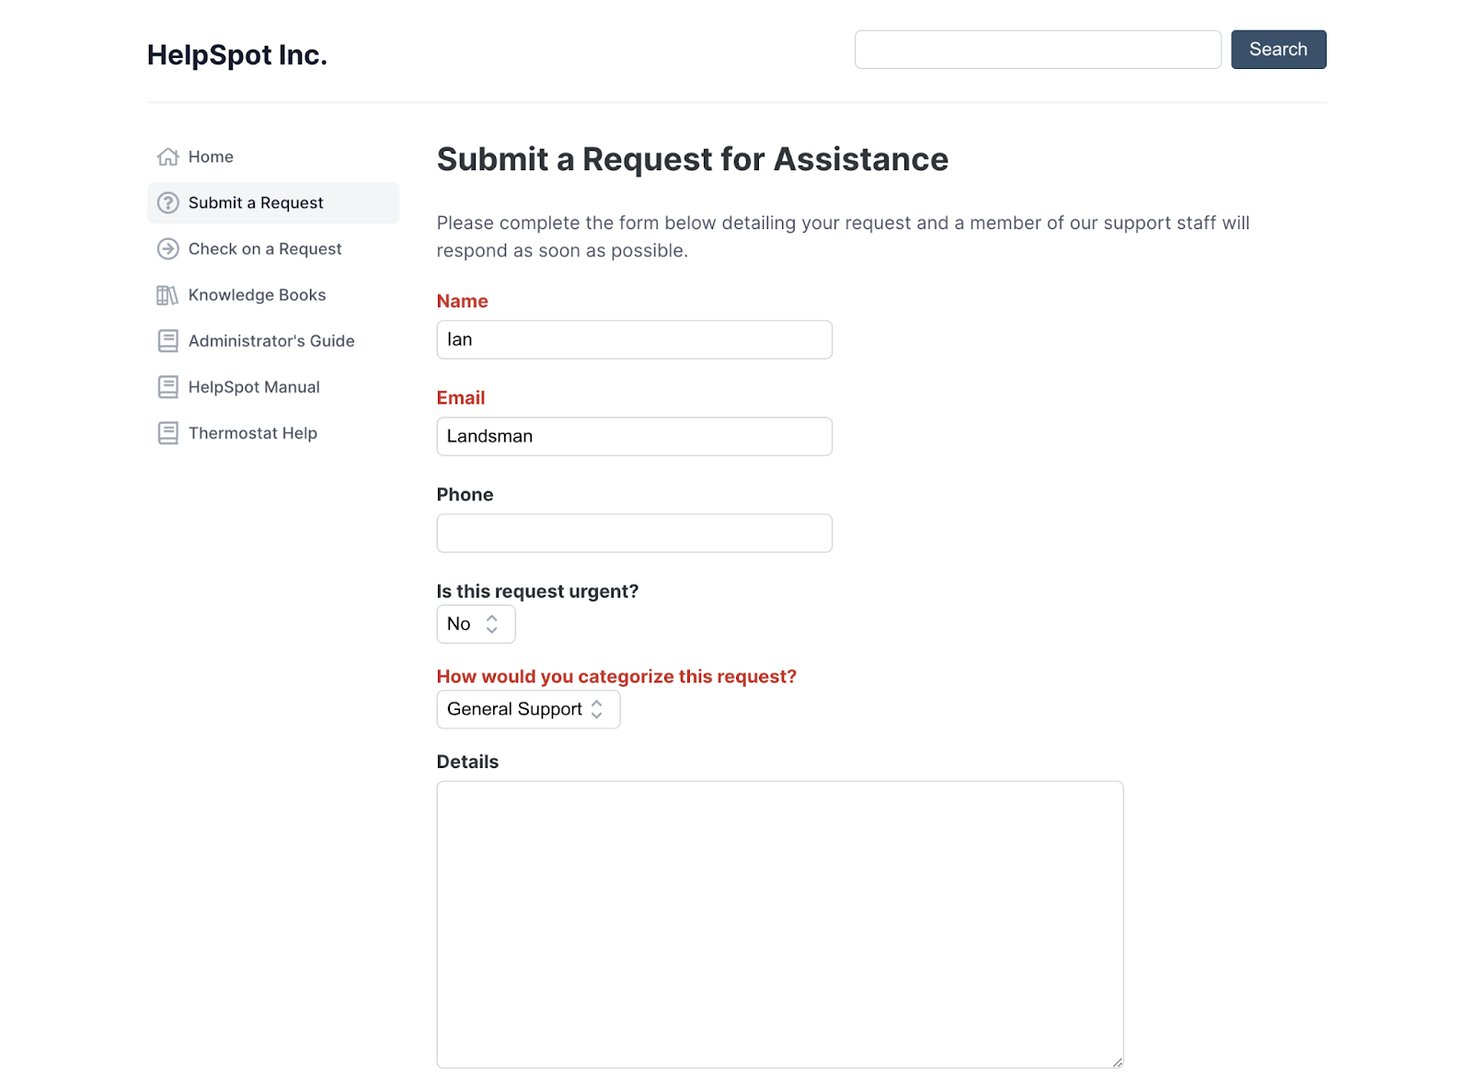 Self-service-portal: Submit a Request for Assistance